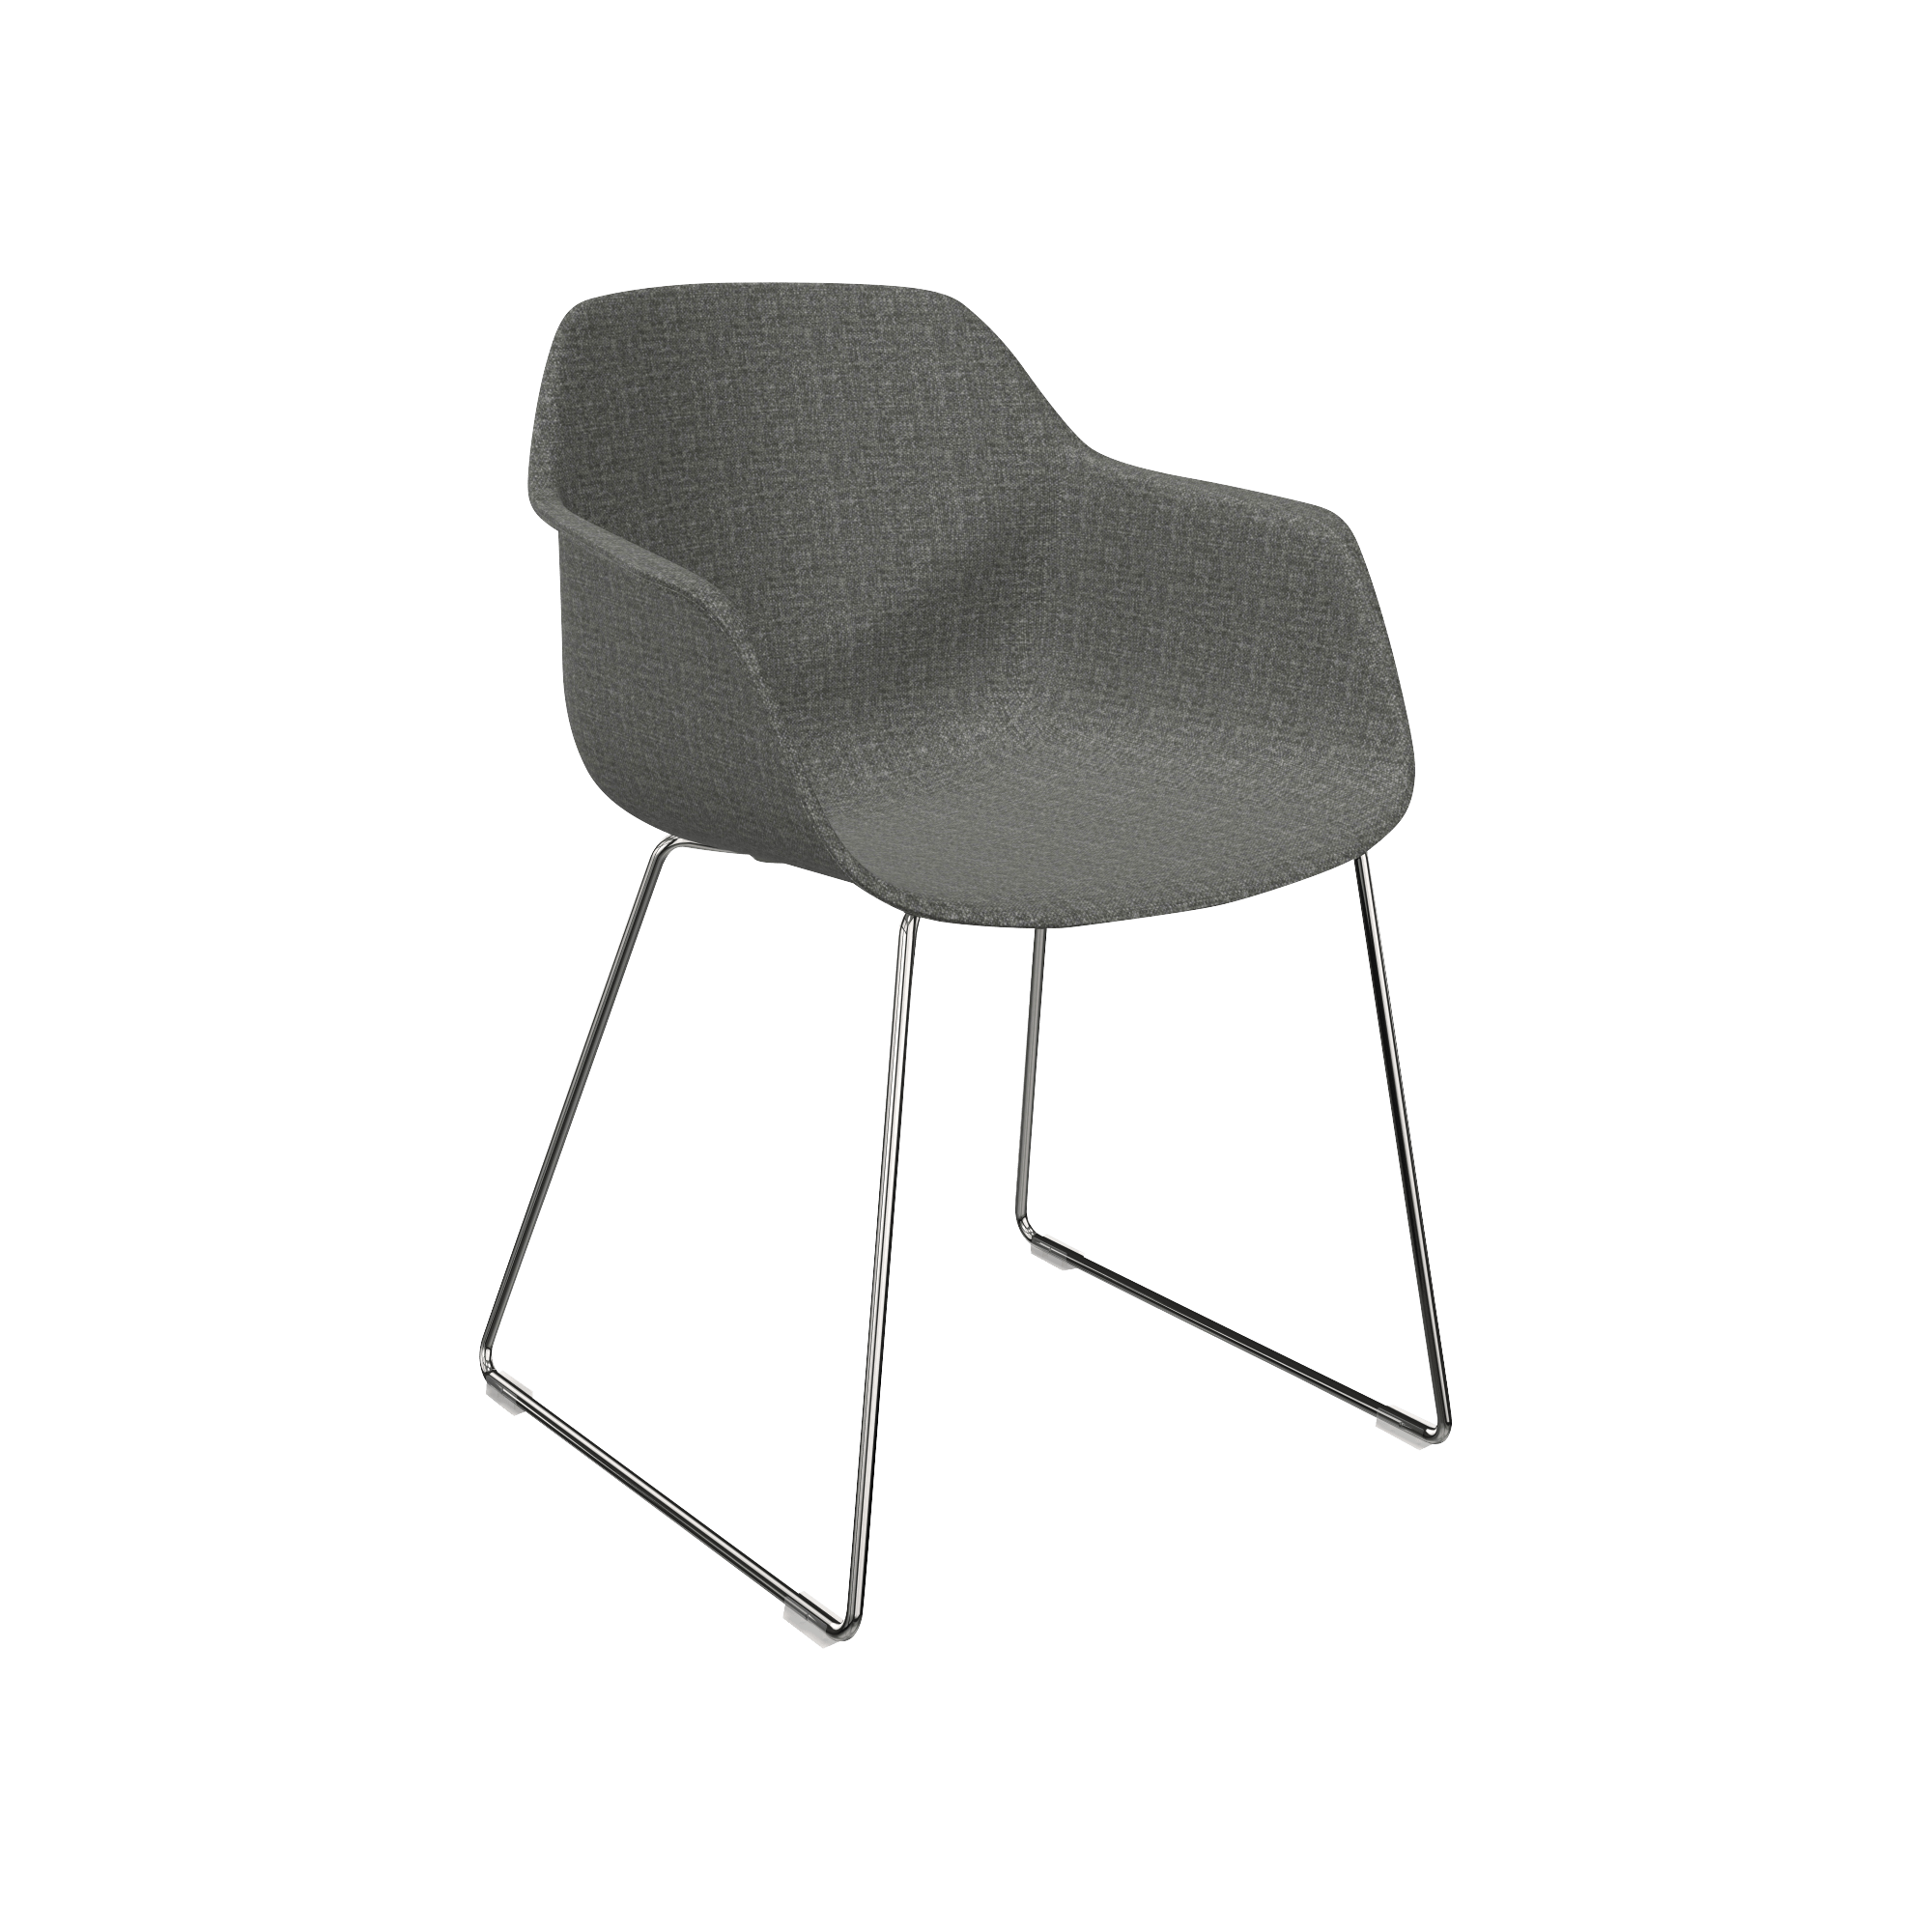 A grey upholstered chair with a metal frame.